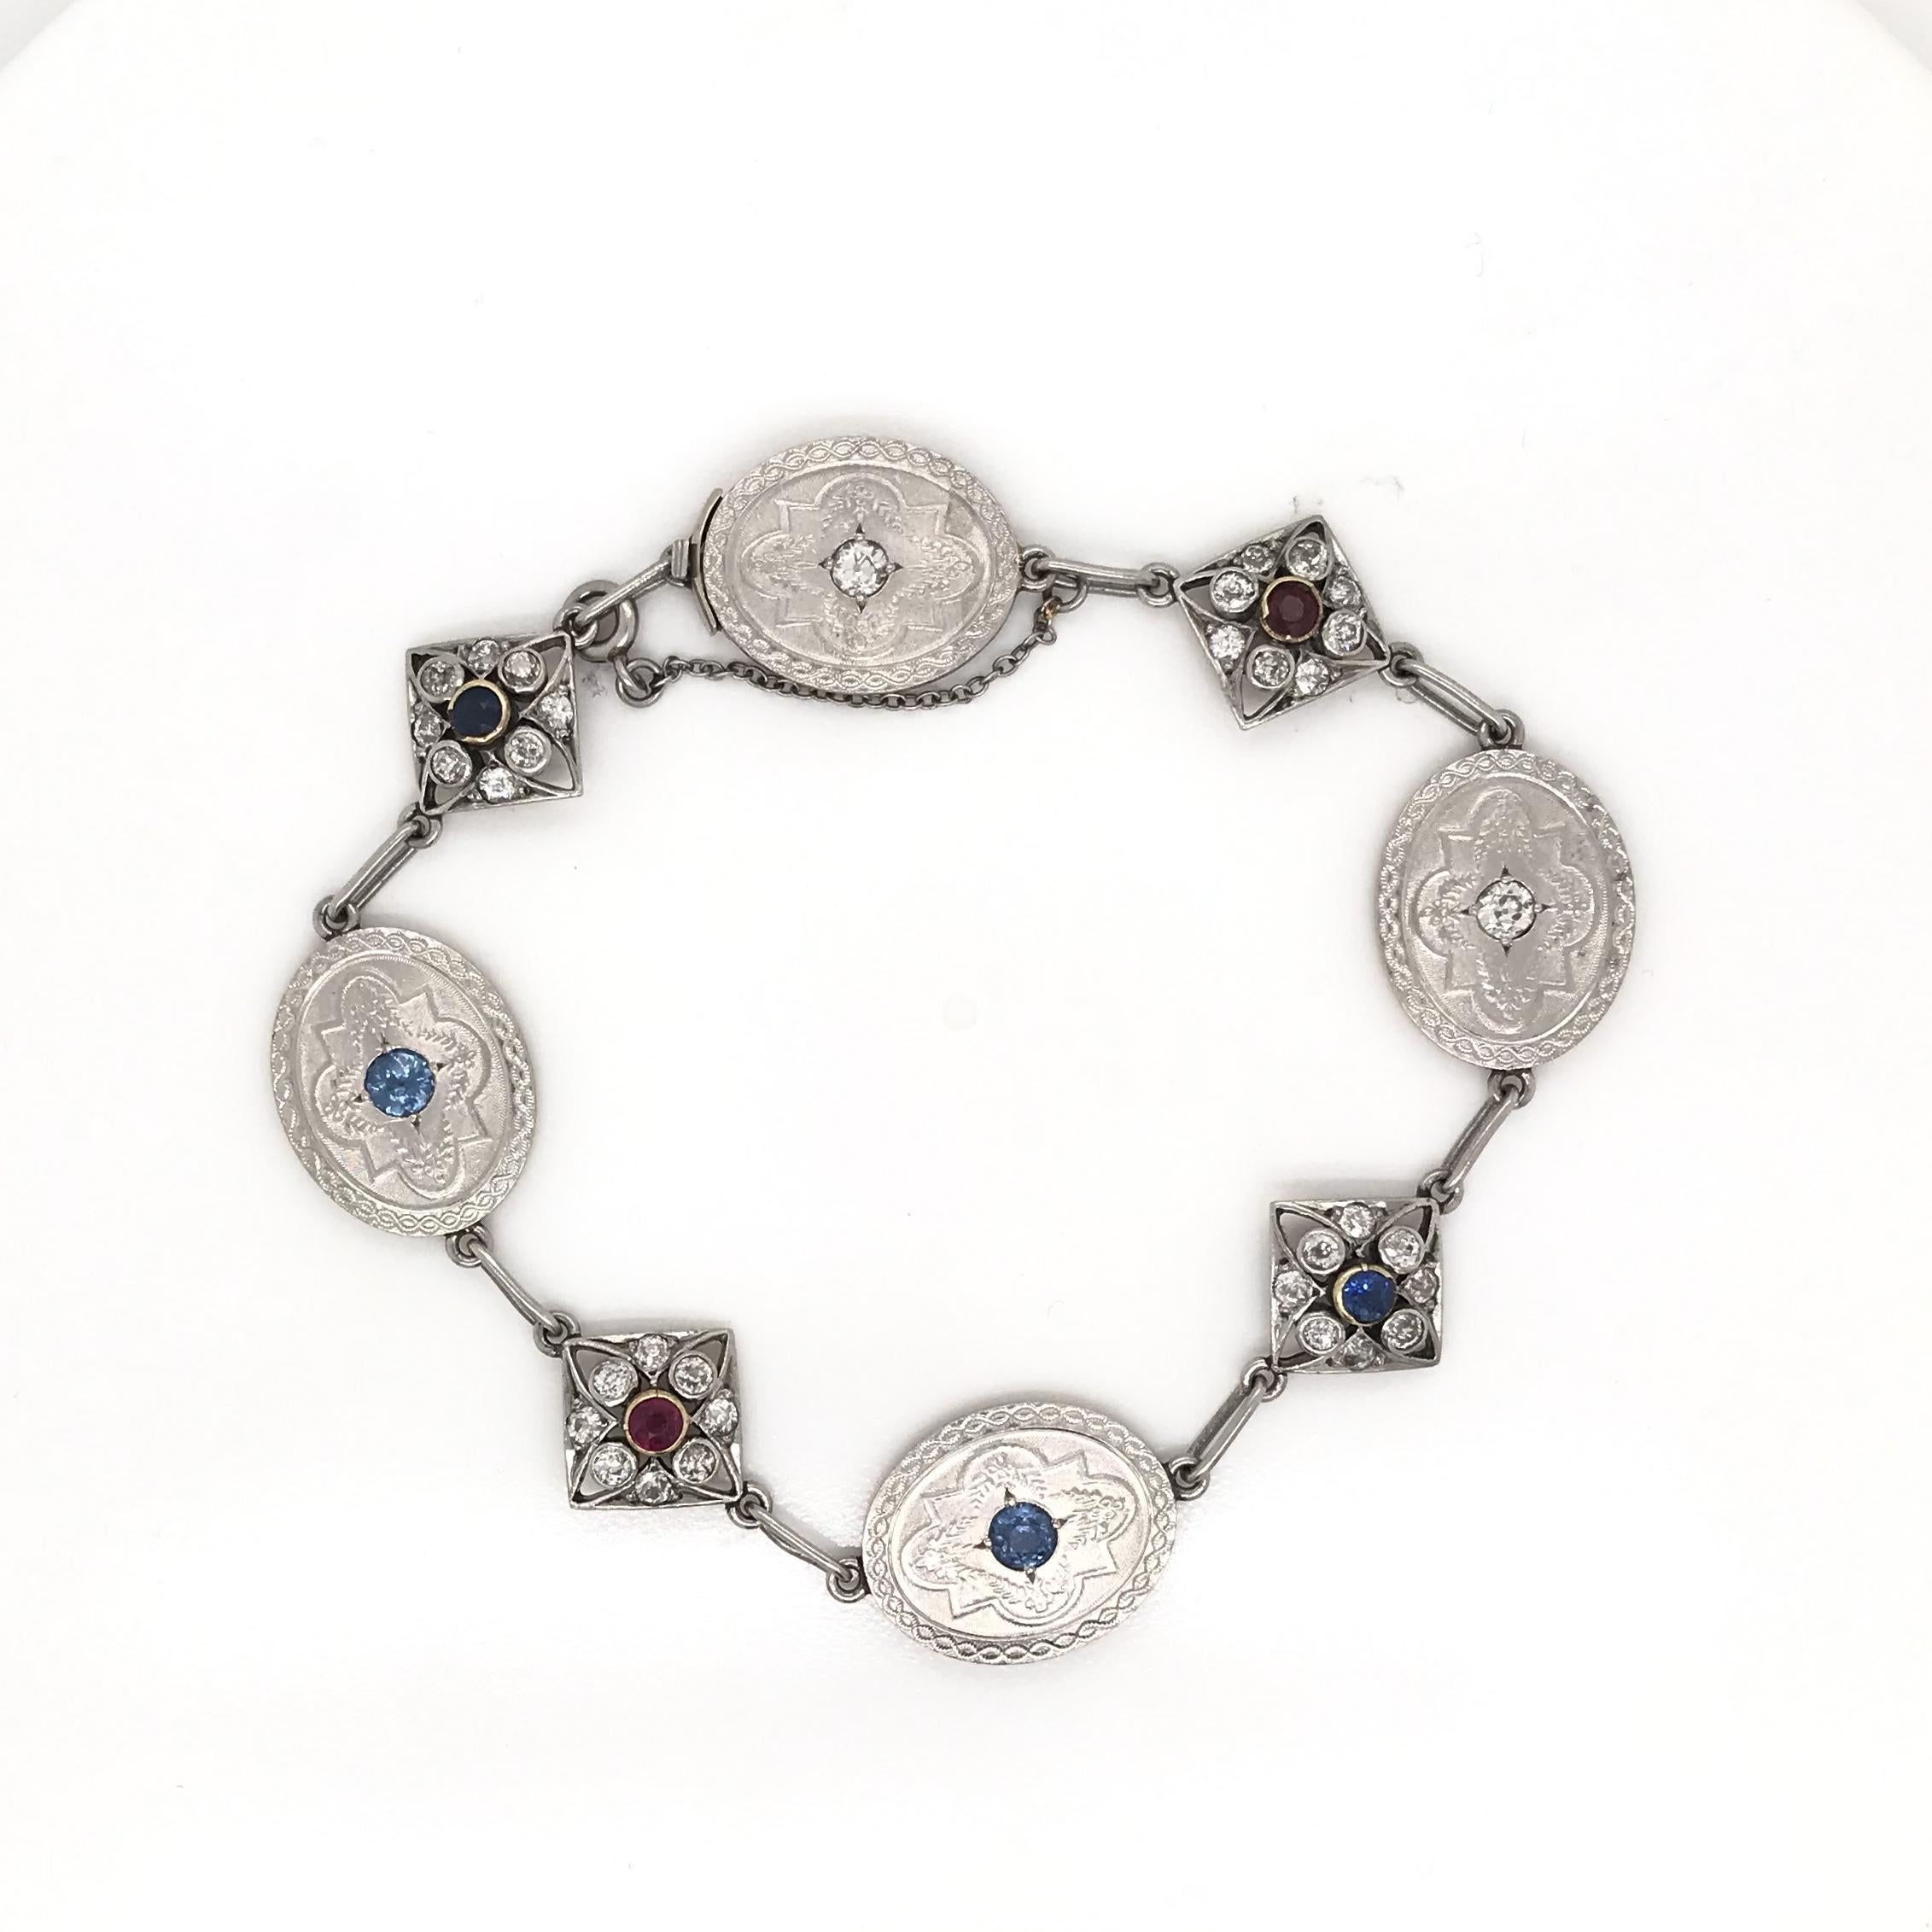 This antique piece was crafted sometime during the Art Deco design period (1920-1940). The bracelet features alternating filigree charm and medallion links. Each platinum medallion features extensive engravings along with sapphire and diamond